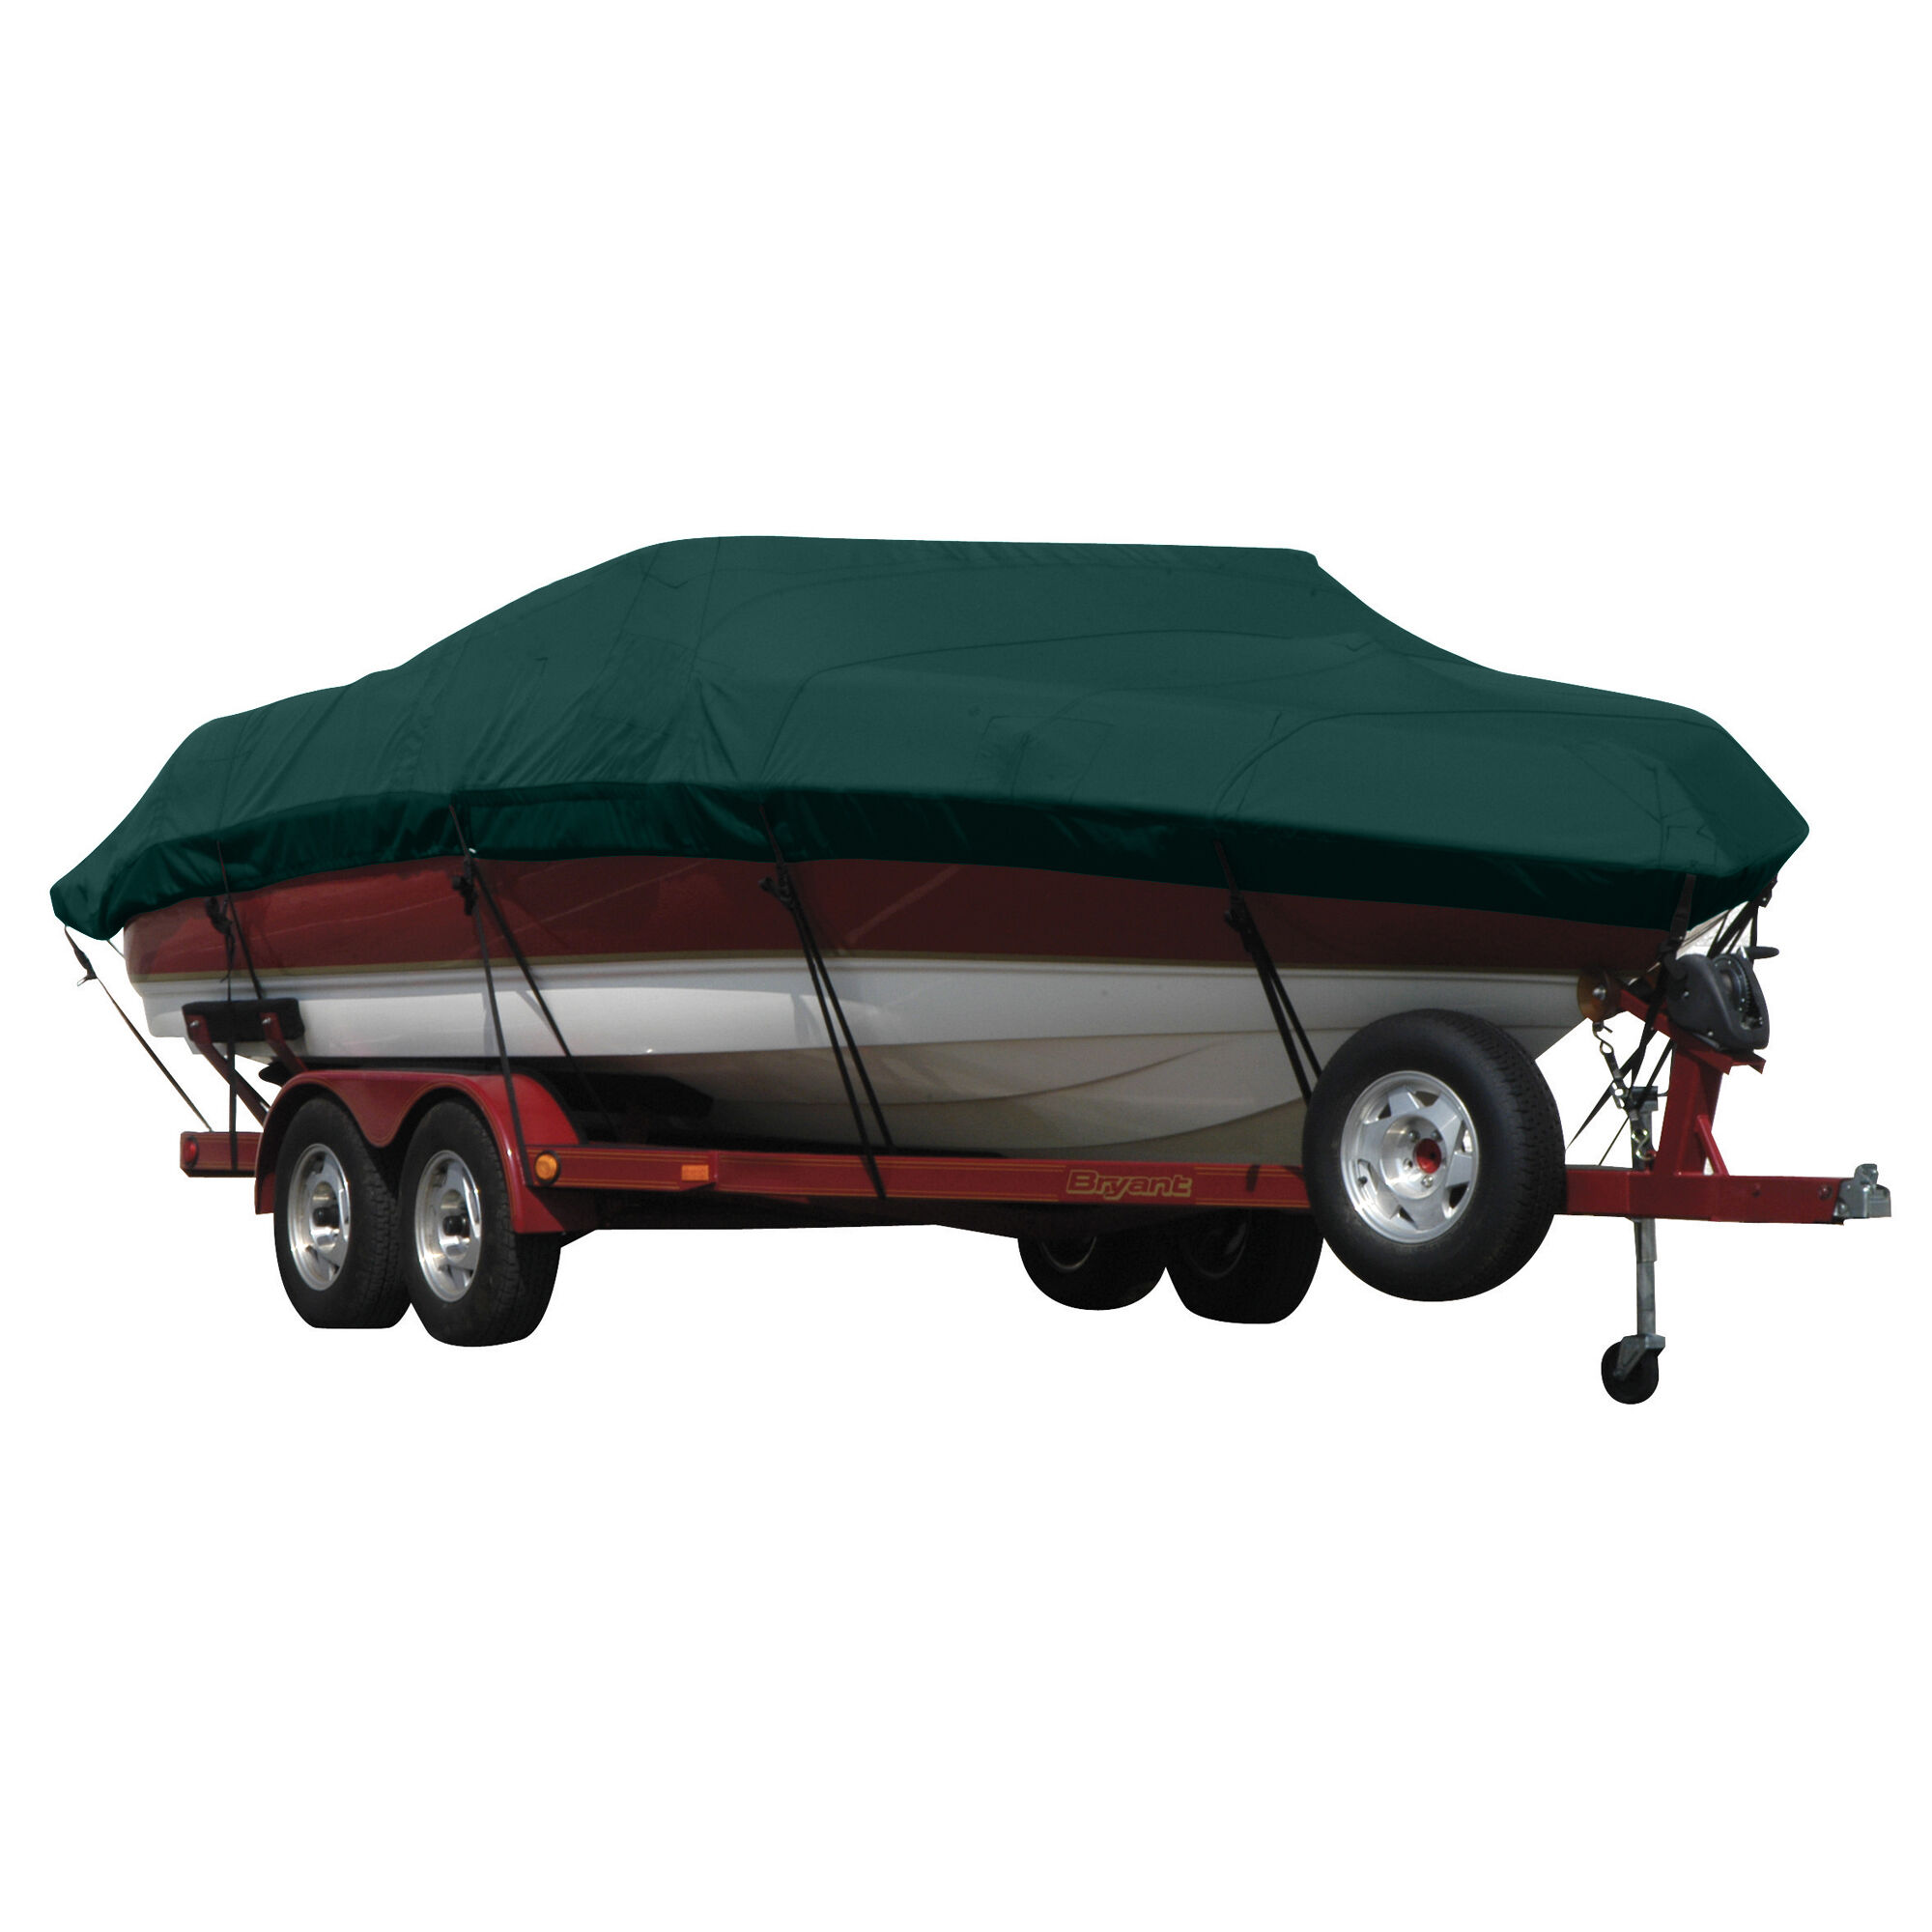 Covermate Exact Fit Sunbrella Boat Cover for Hydrodyne Gtx Air Gtx Air w/ Tower Doesn't Cover Swim Platform I/B. Forest Green Acrylic